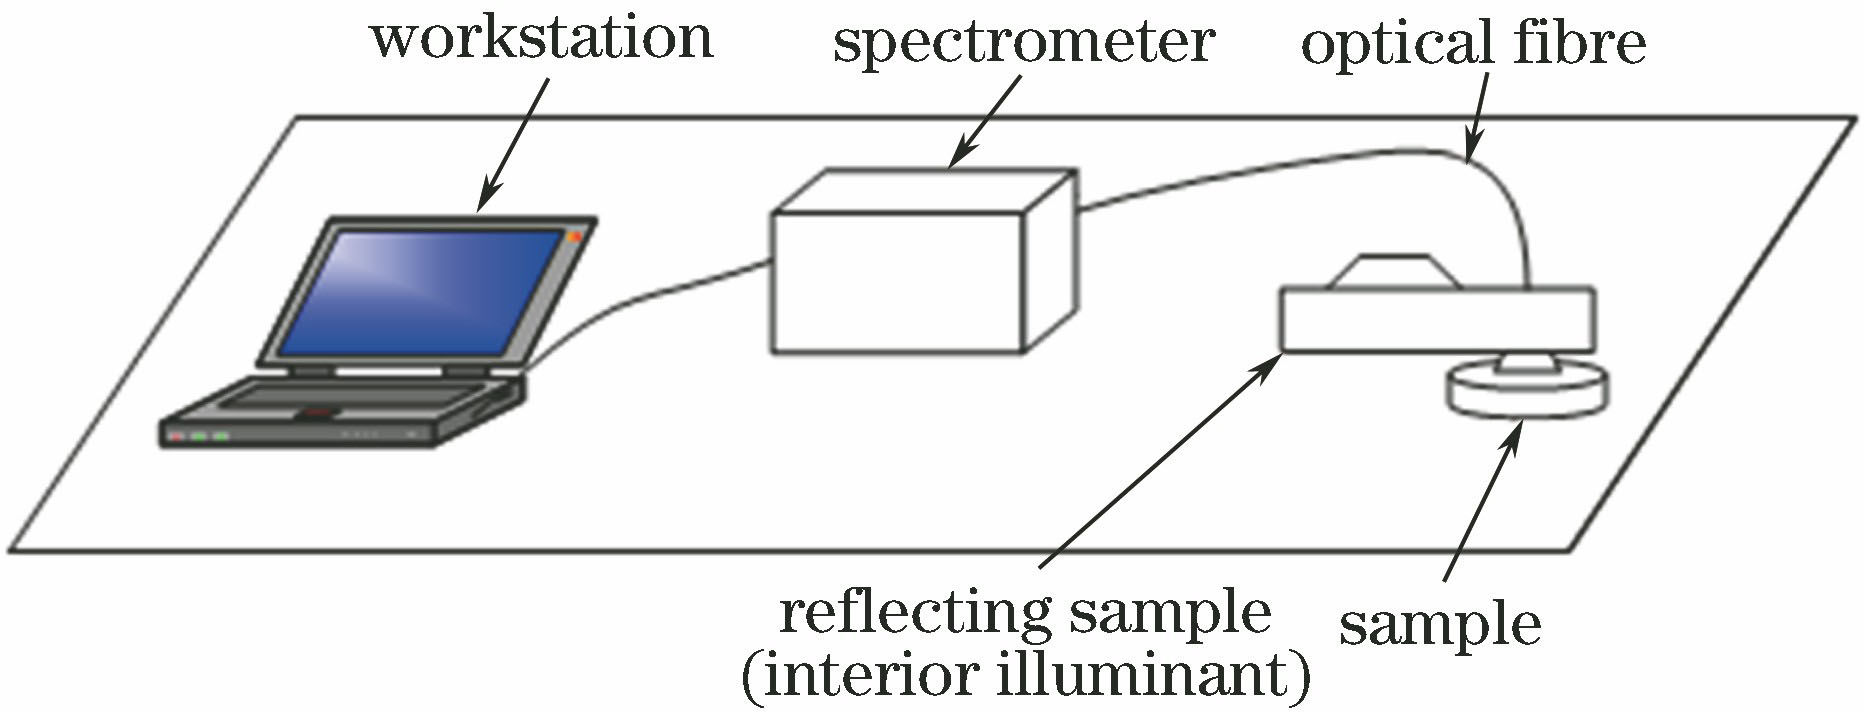 Indoor hyperspectral acquisition system